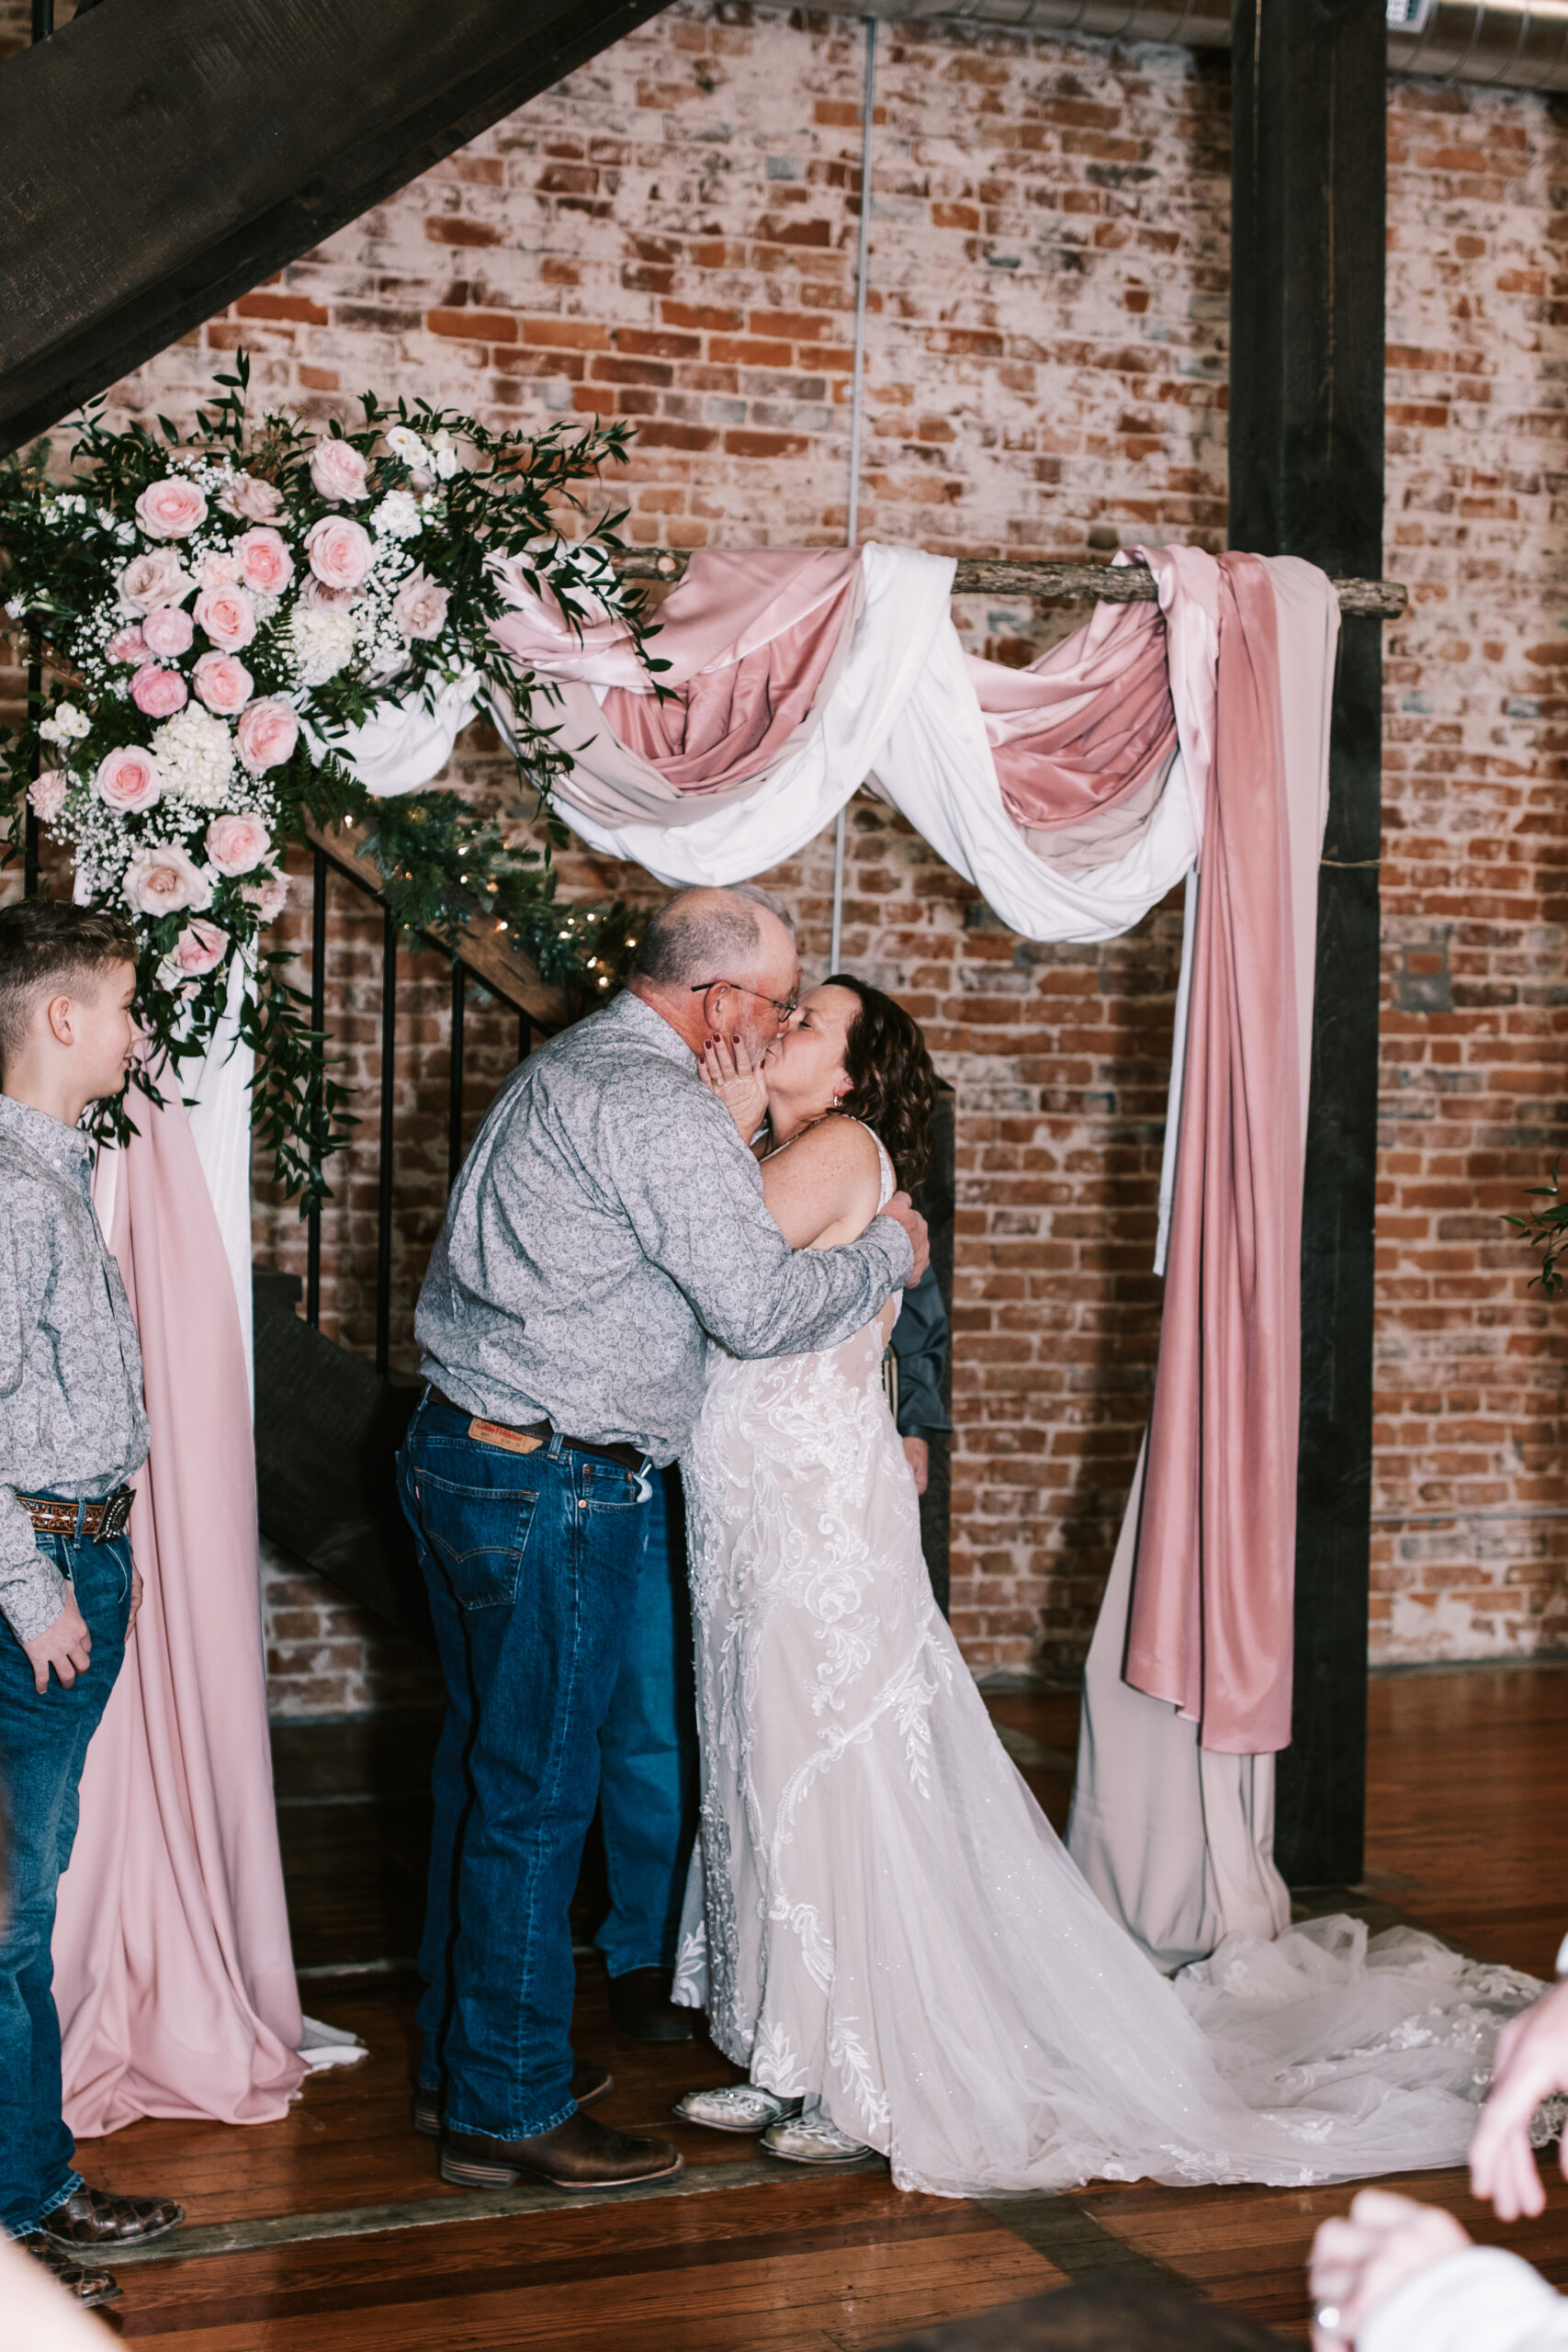 A bride and groom kissing at the end of wedding ceremony at a Missouri wedding. Photography by Bailey Morris.
